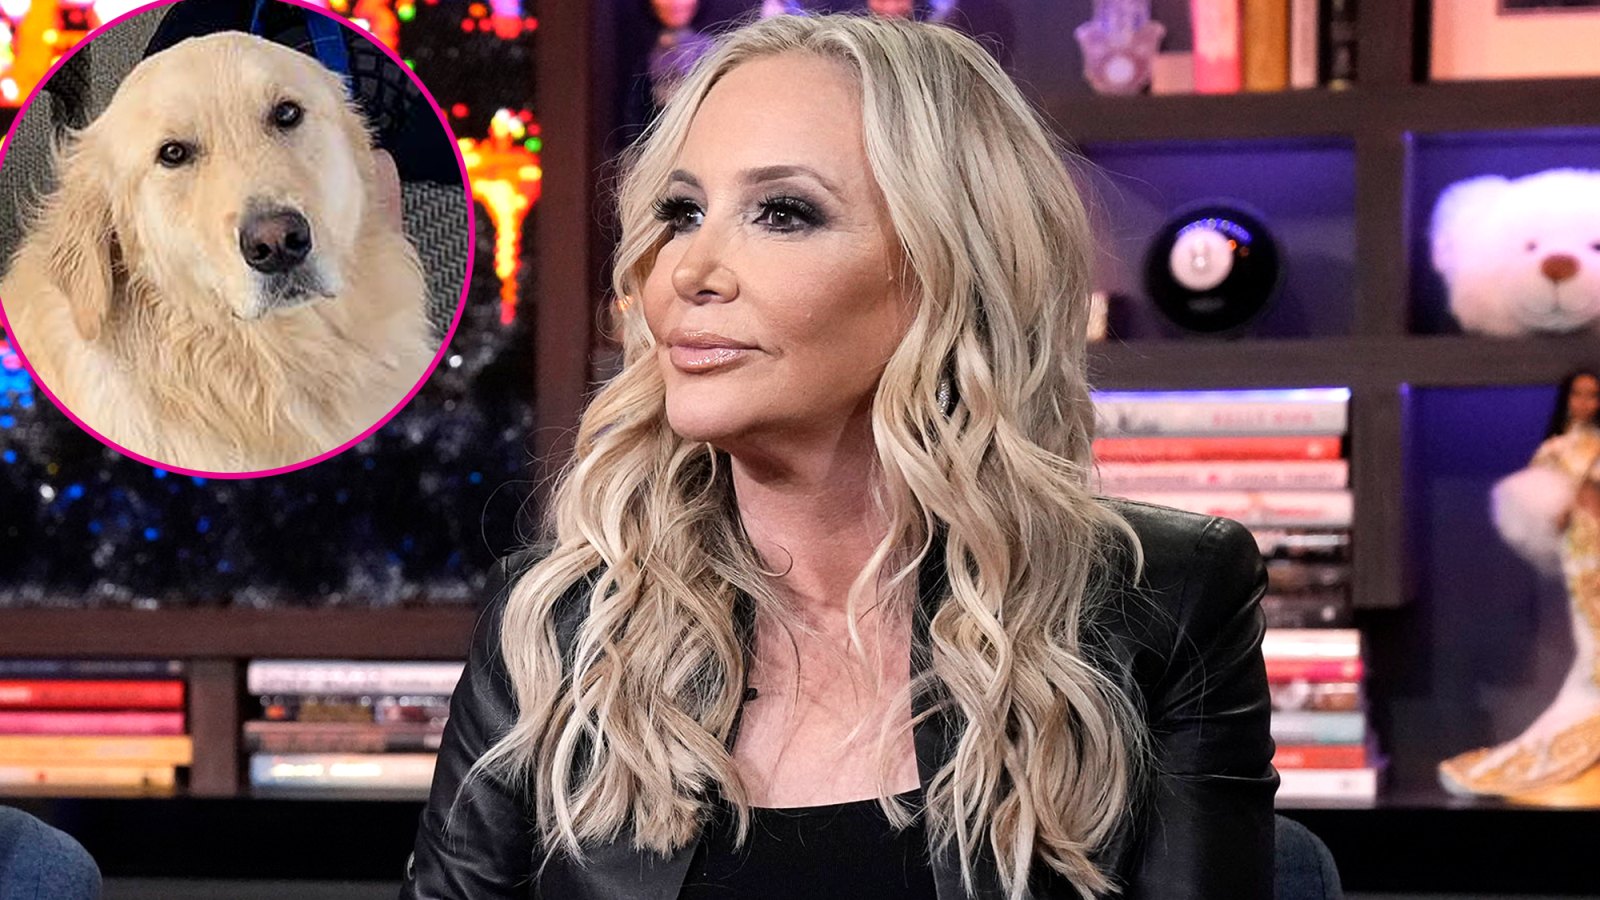 Animal Control Is Getting Involved in RHOC’s Shannon Beador DUI Hit-and-Run Incident